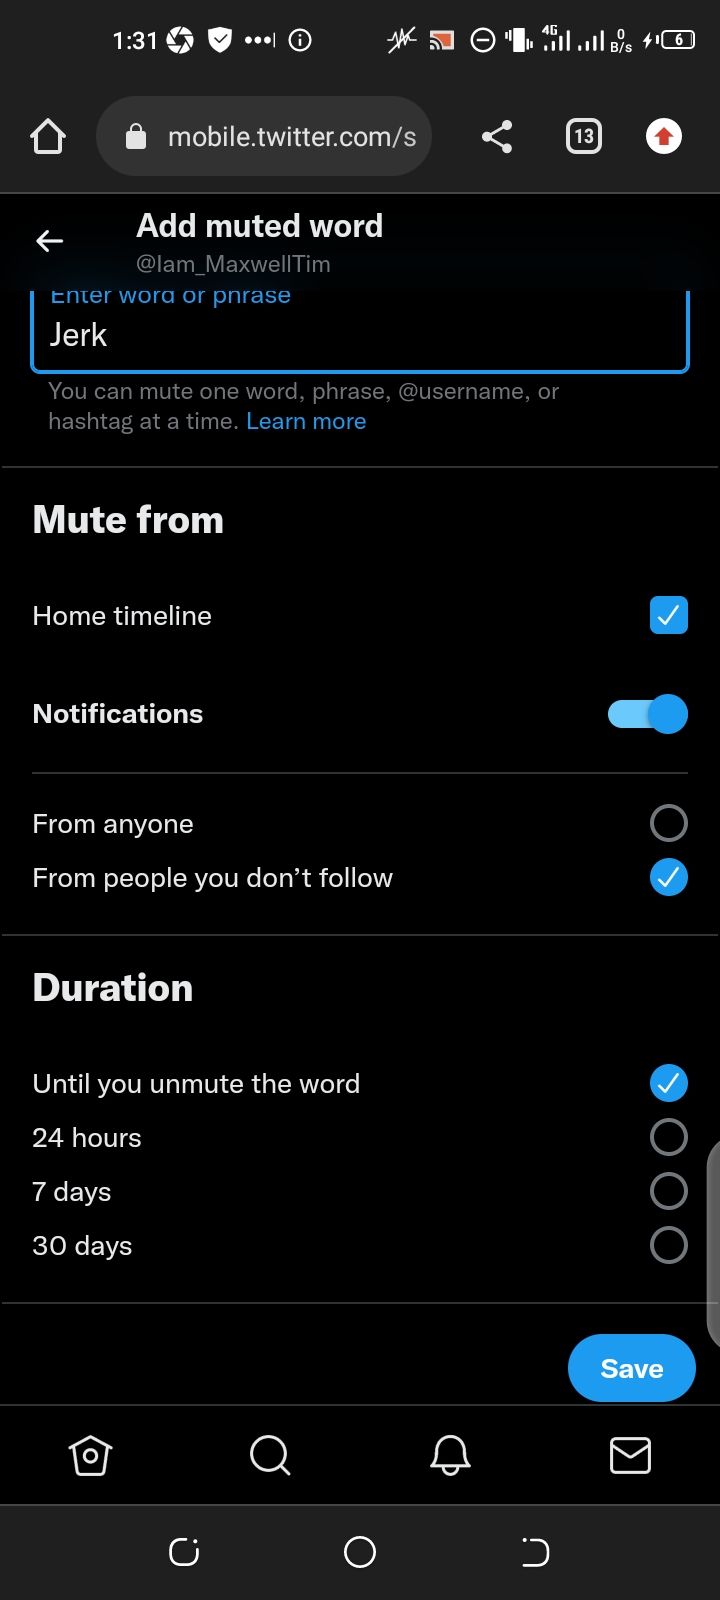 Muting words on Twitter 